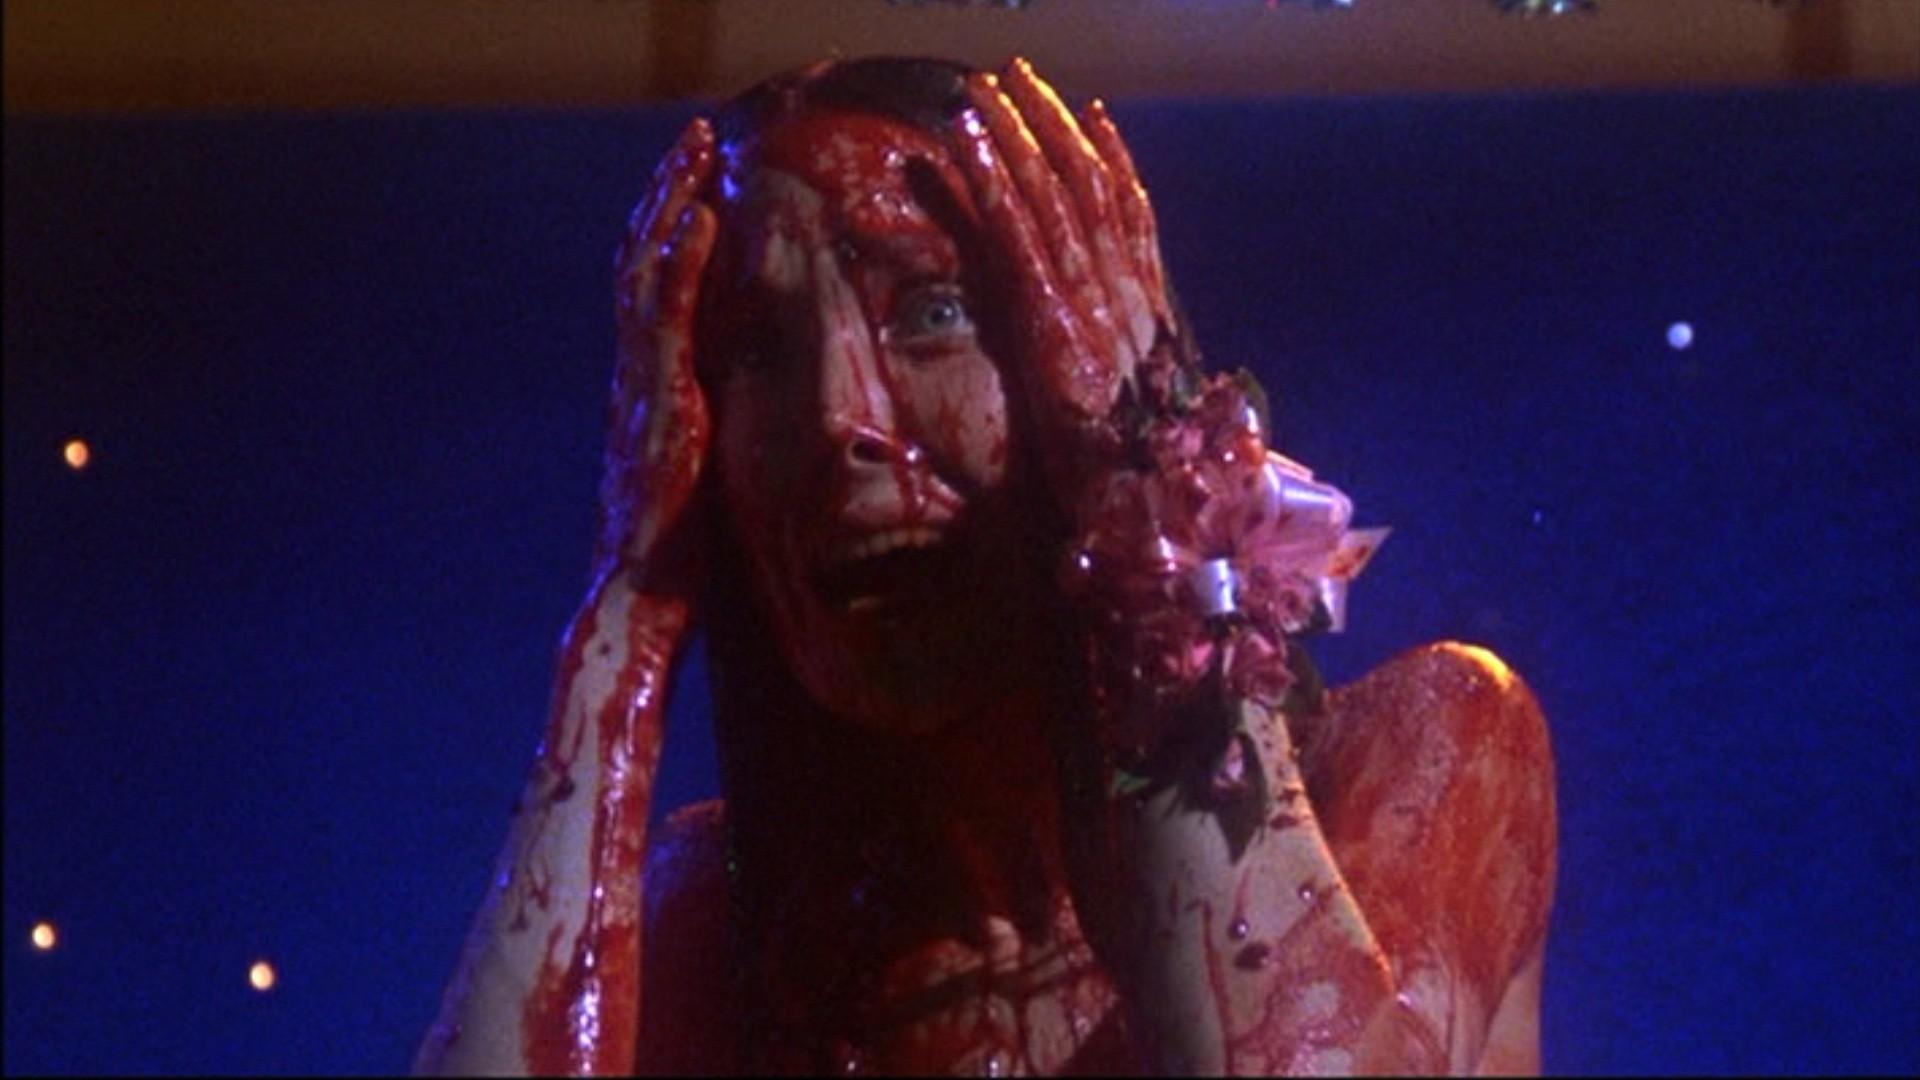 After the brutal prank, what words ring in Carrie's ears?